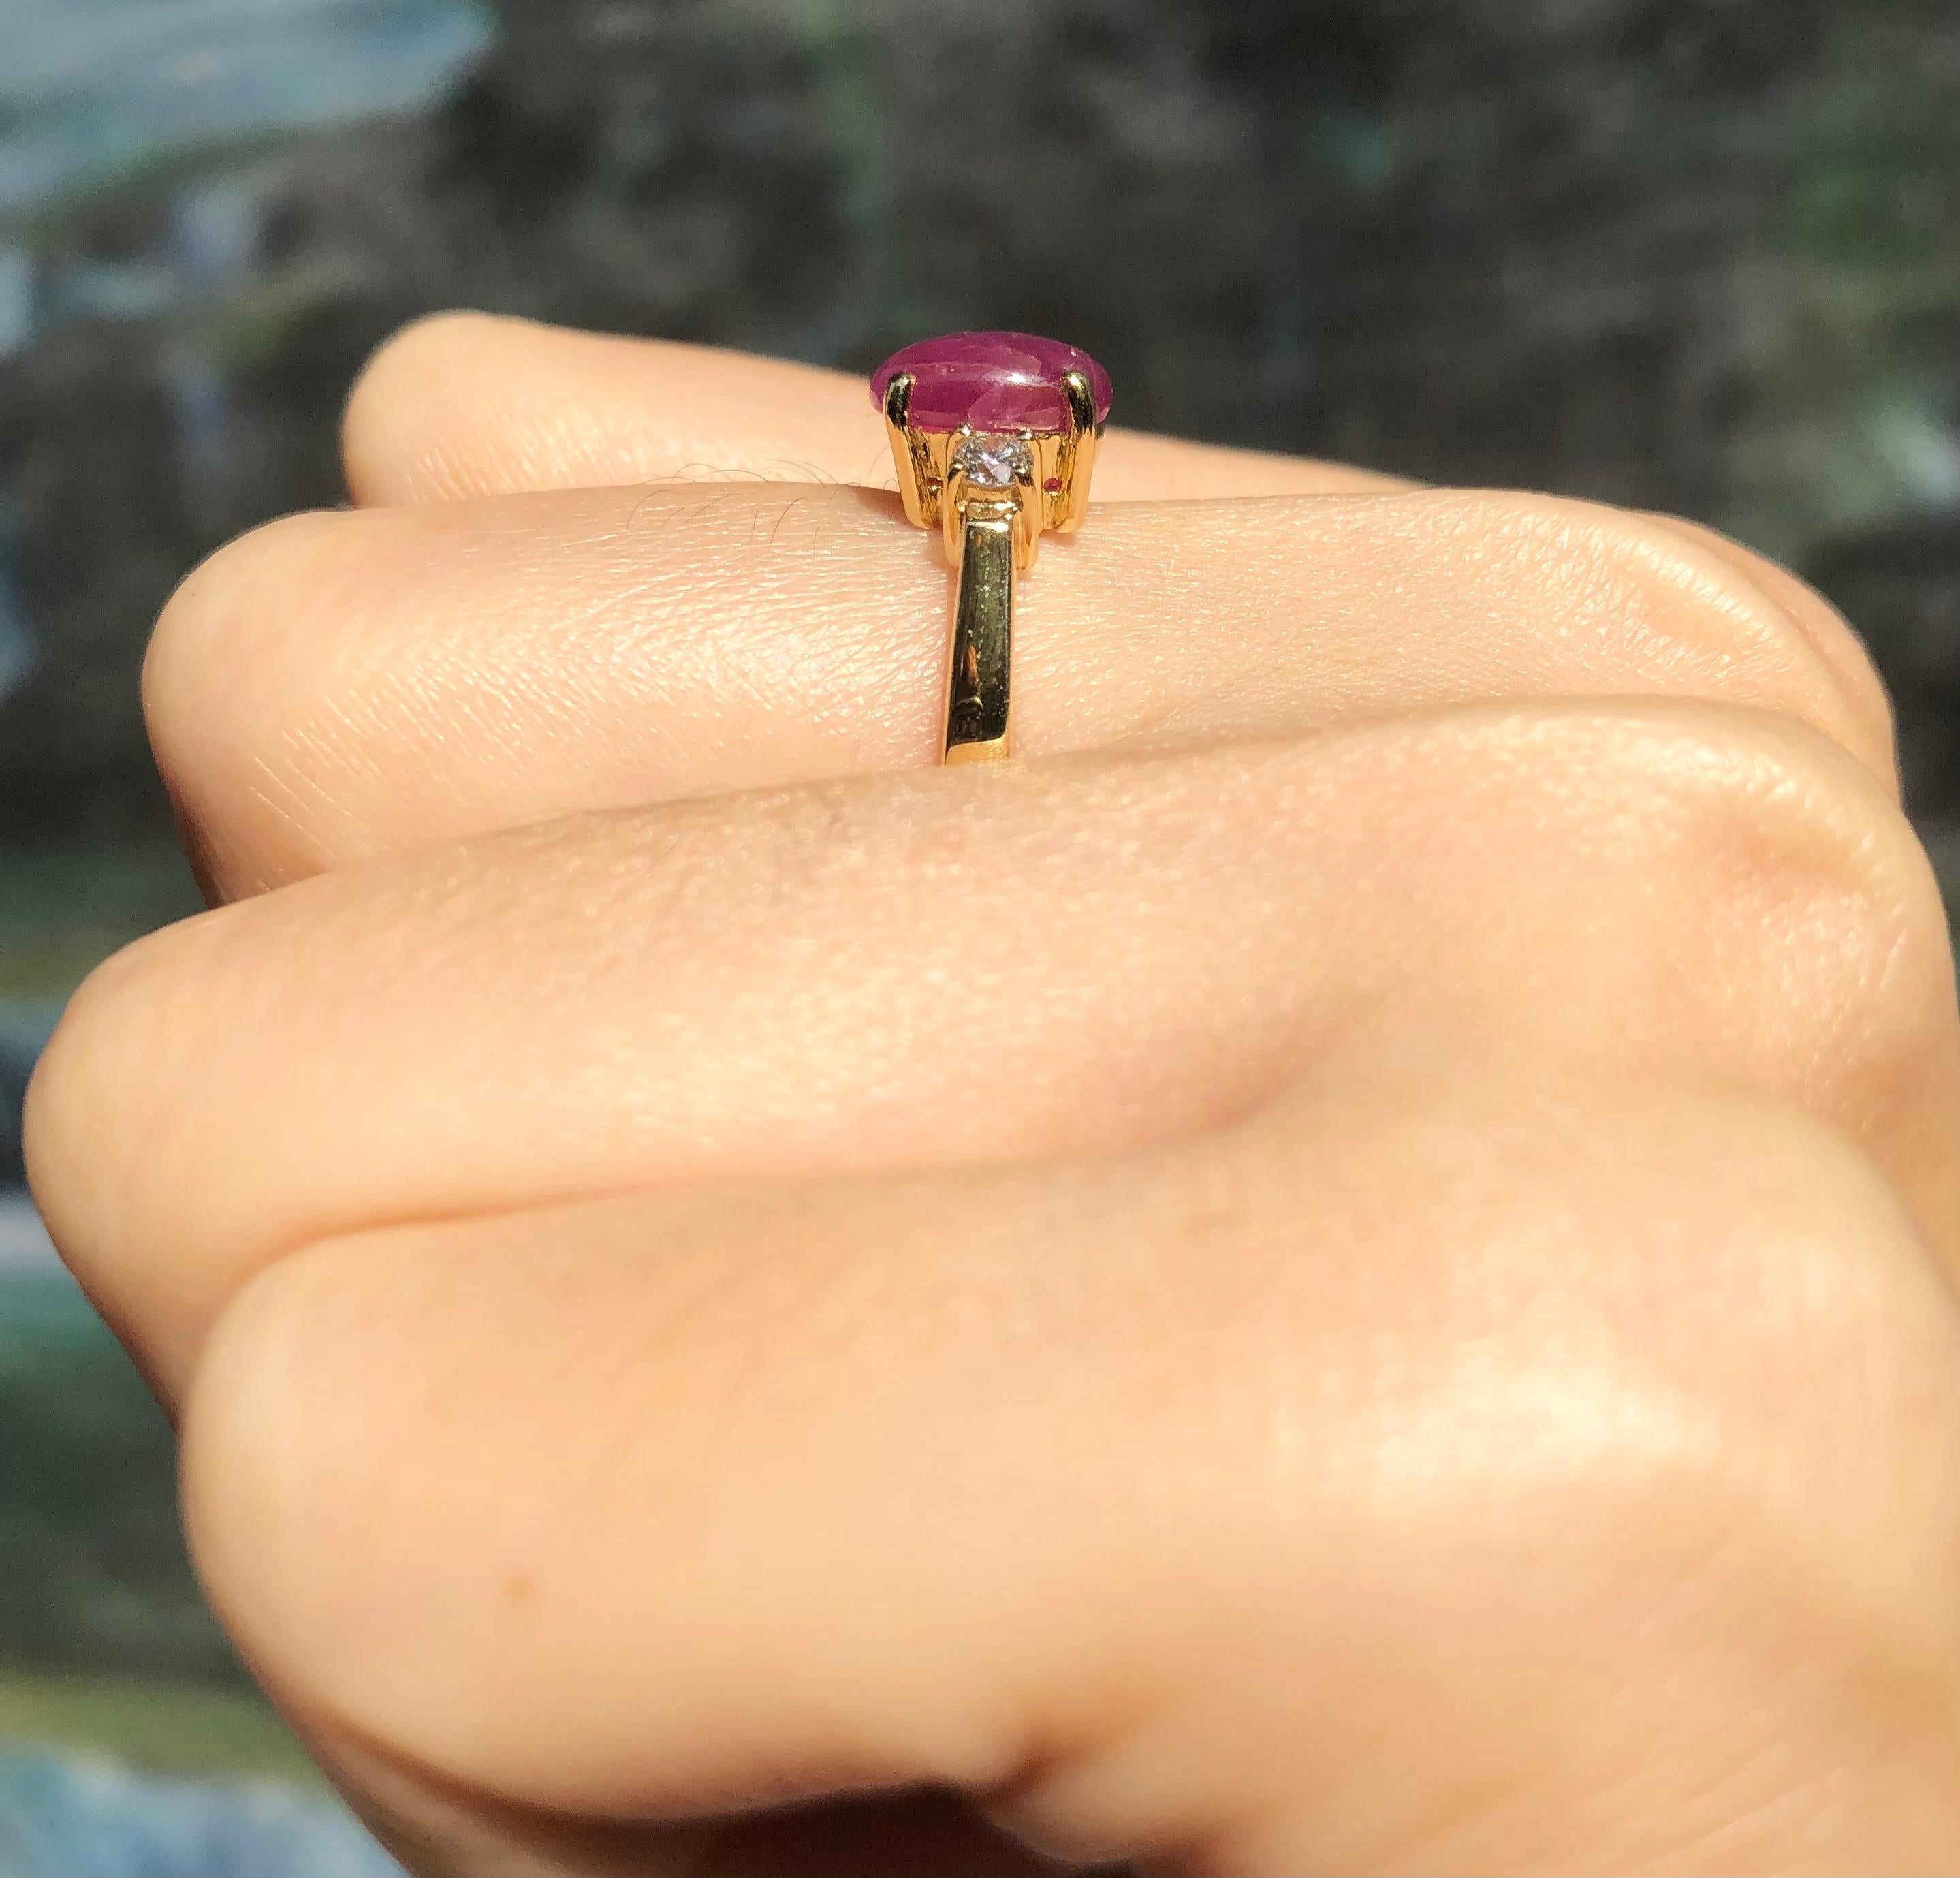 Star Ruby 2.07 carats with Diamond 0.17 carat Ring set in 18 Karat Gold Settings
(GIT Certified, The Gem and Jewelry Institute of Thailand)

Width:  1.2 cm 
Length: 0.8 cm
Ring Size: 52
Total Weight: 3.96 grams

Star Ruby
Width:  0.7 cm 
Length: 0.8